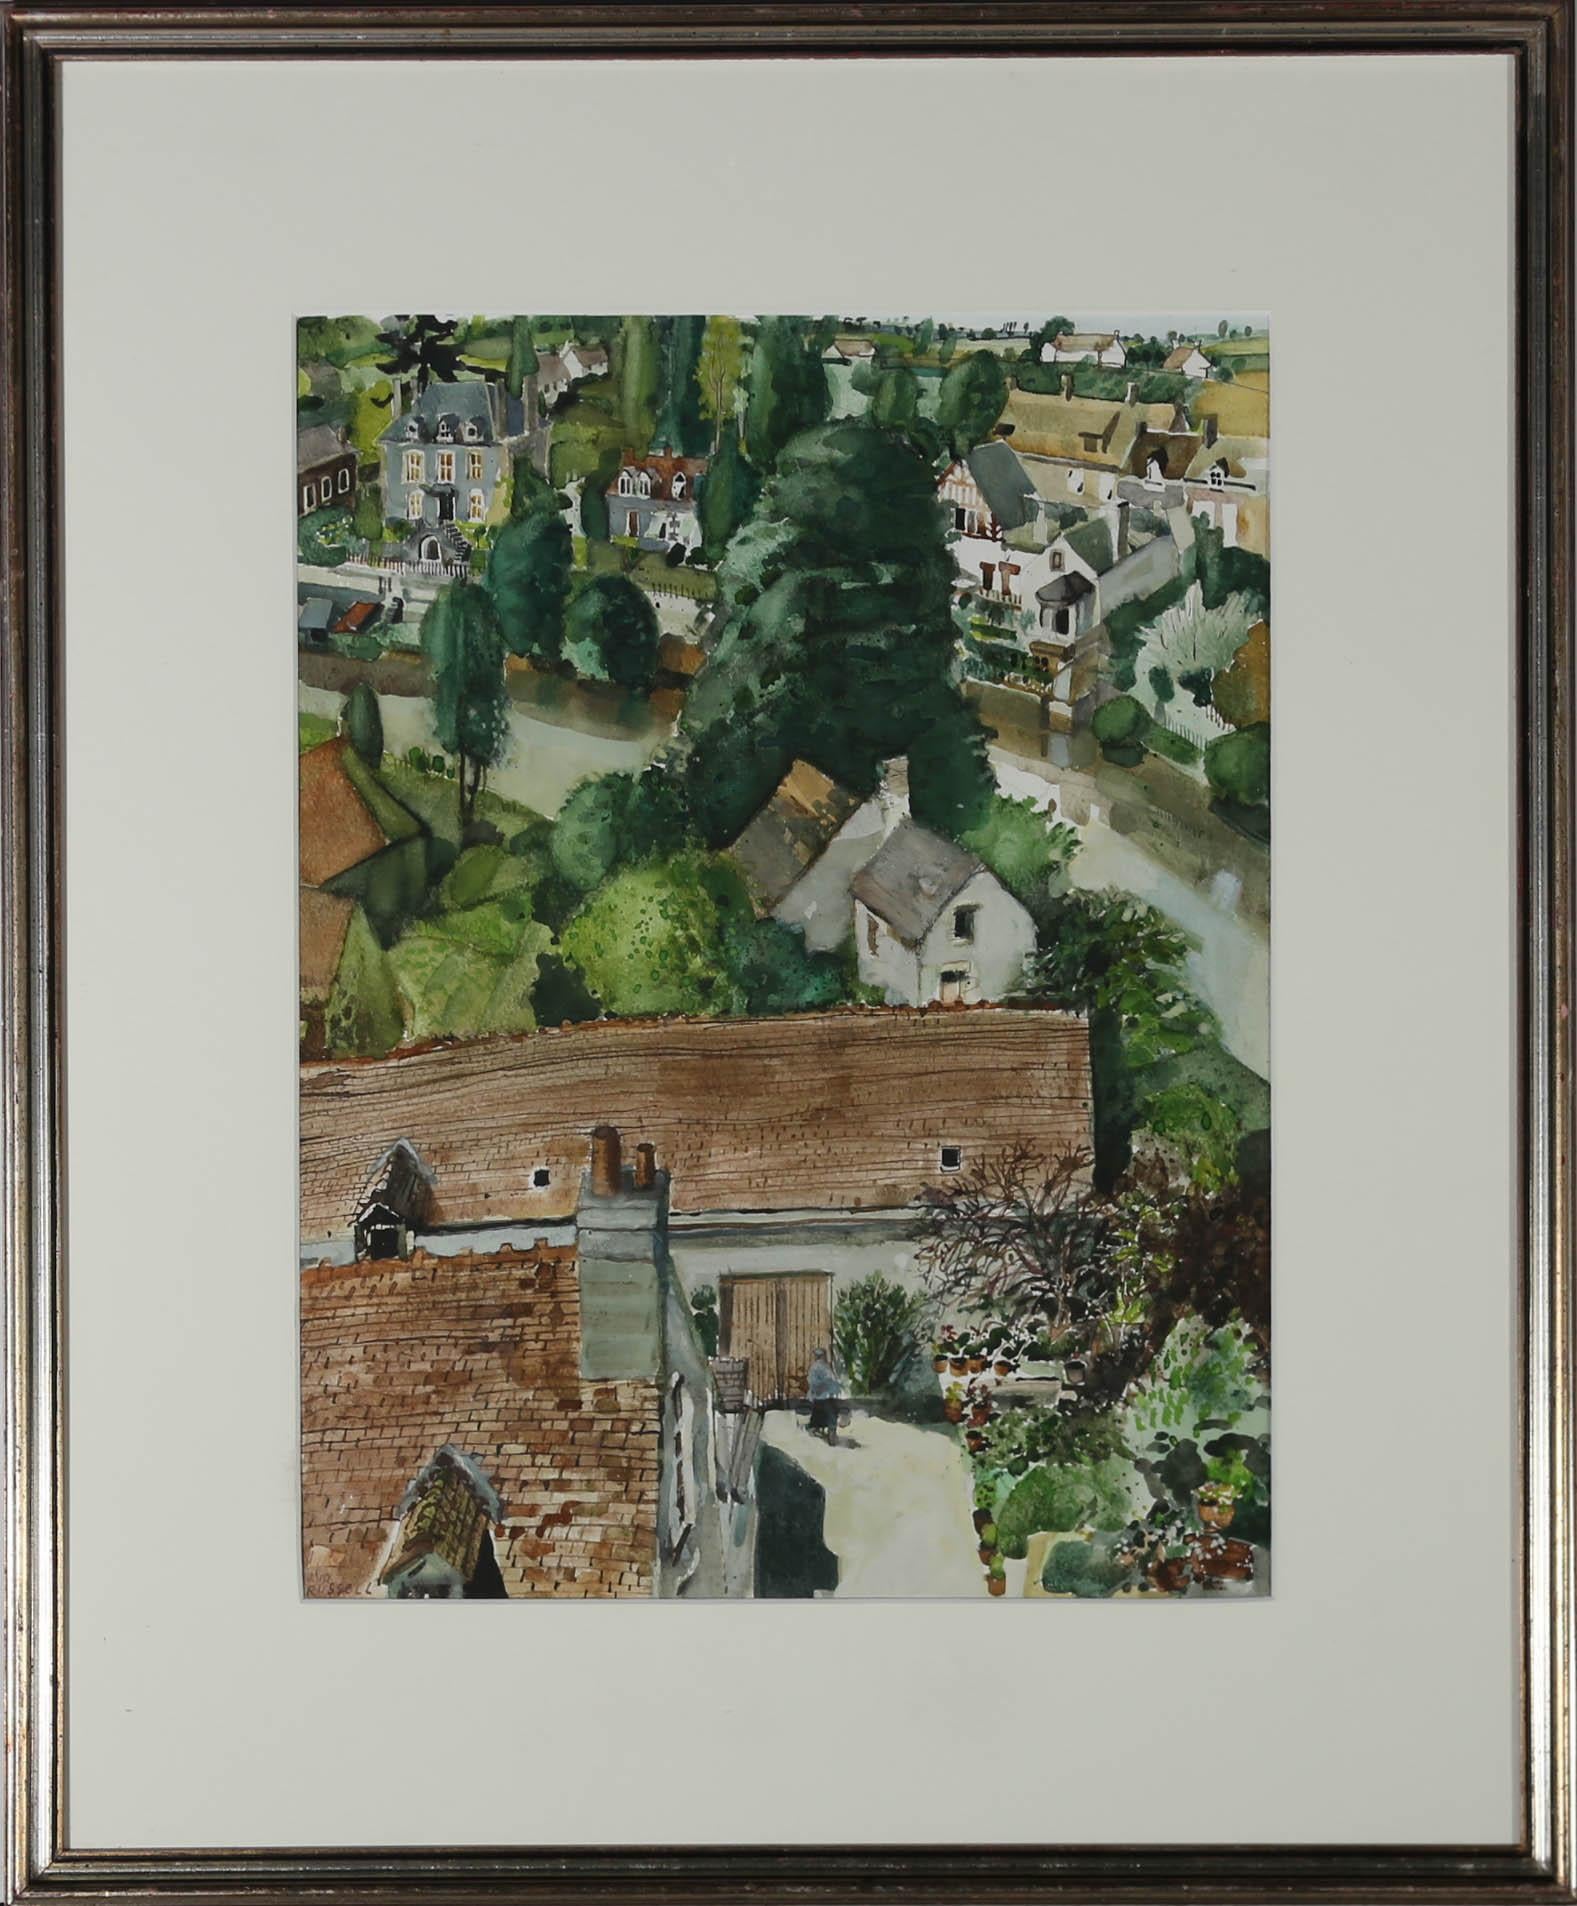 A delightful aerial view of Fresnay Sur Sarthe a commune in France. The artist captures the suburban landscape in delicate watercolour, including charming details such as a man gardening and flowerpots. Signed to the lower left. Presented in a gilt